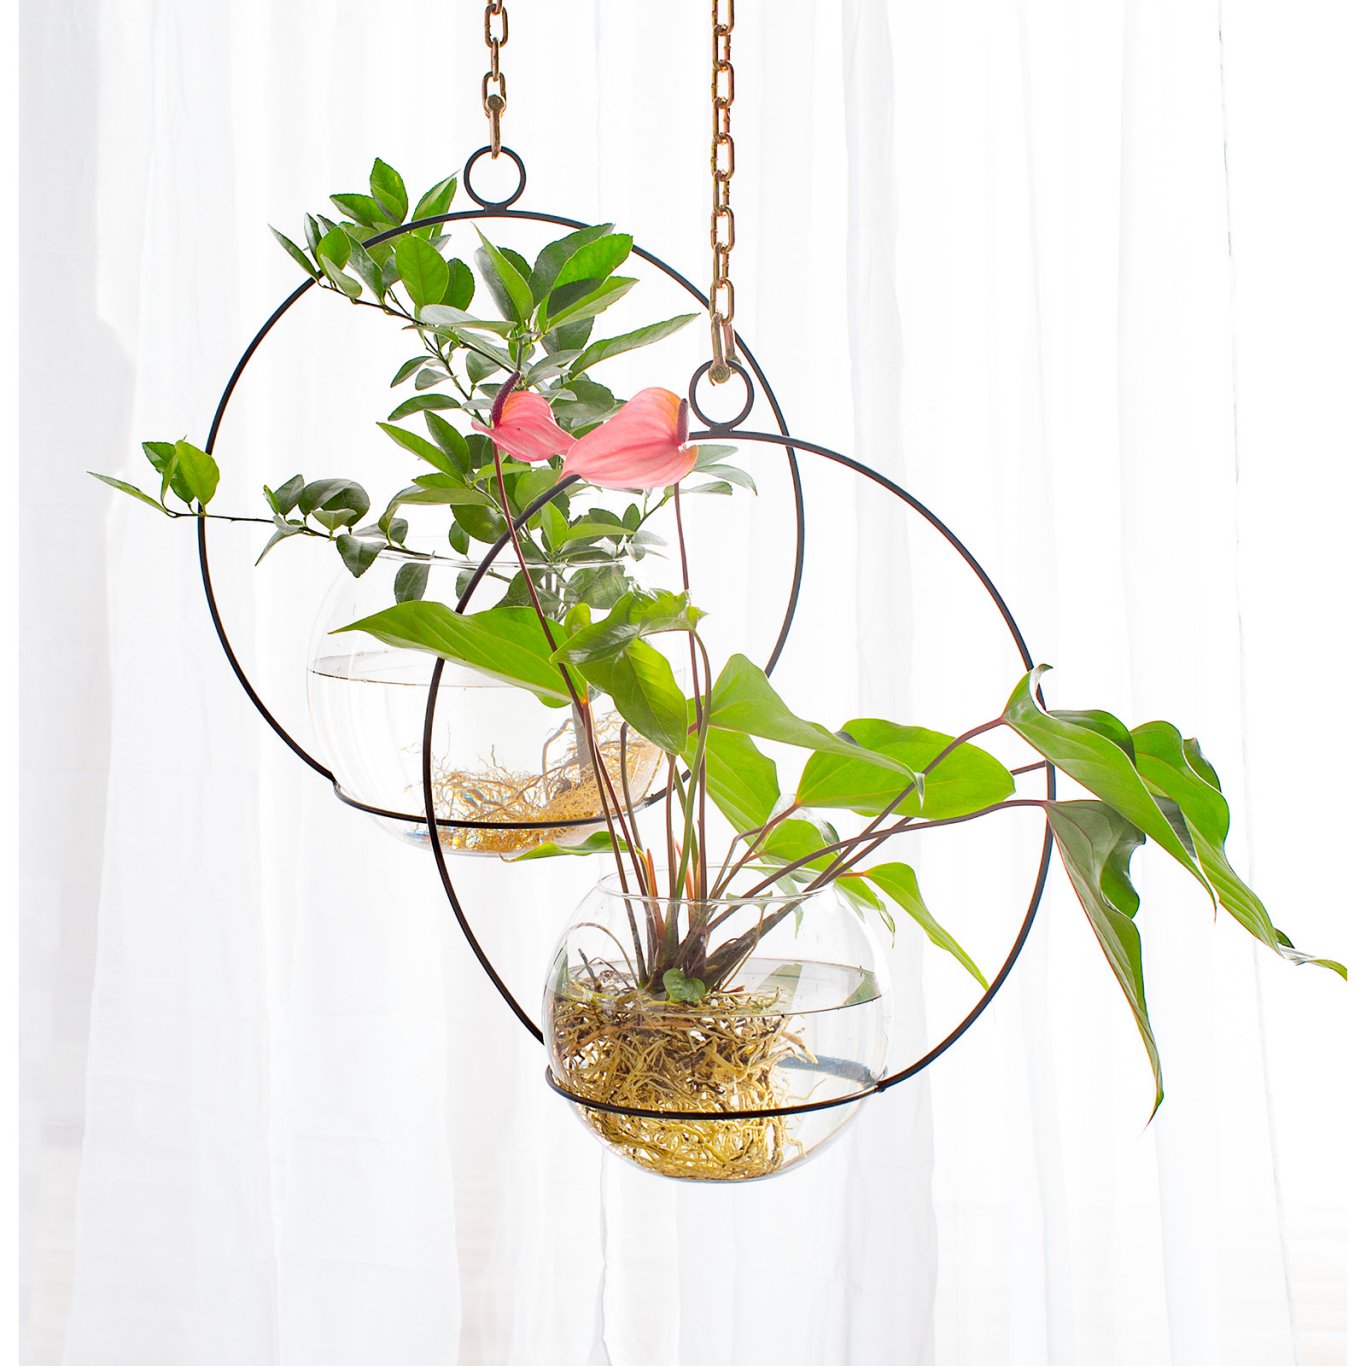 Where to Buy Hanging Hoop Planters